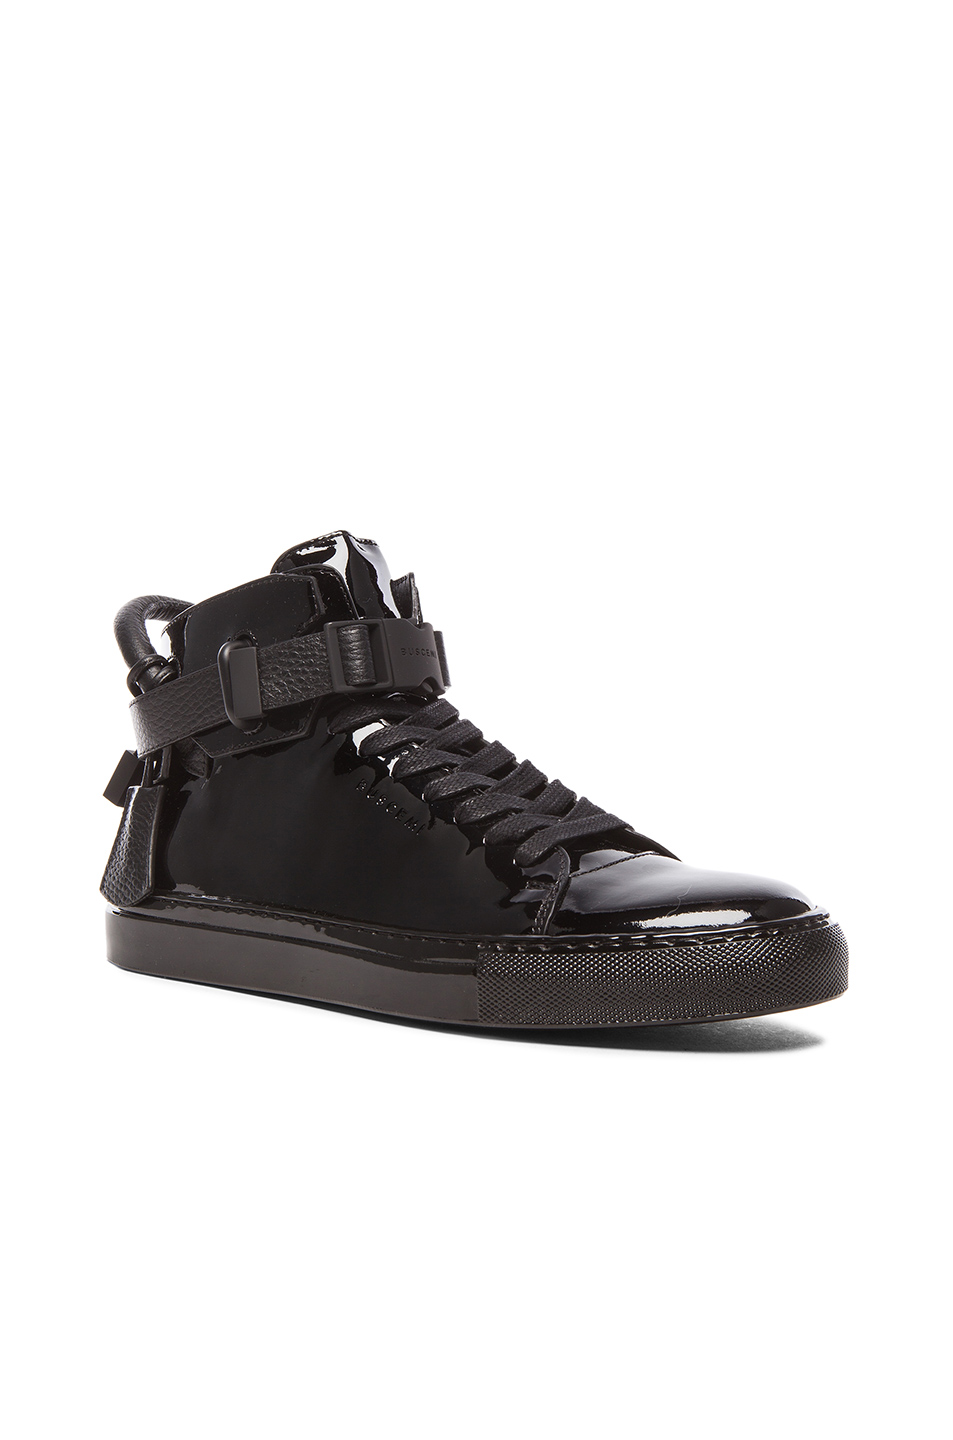 Buscemi 100mm Padlock Patent-leather High-top Trainers In Black | ModeSens